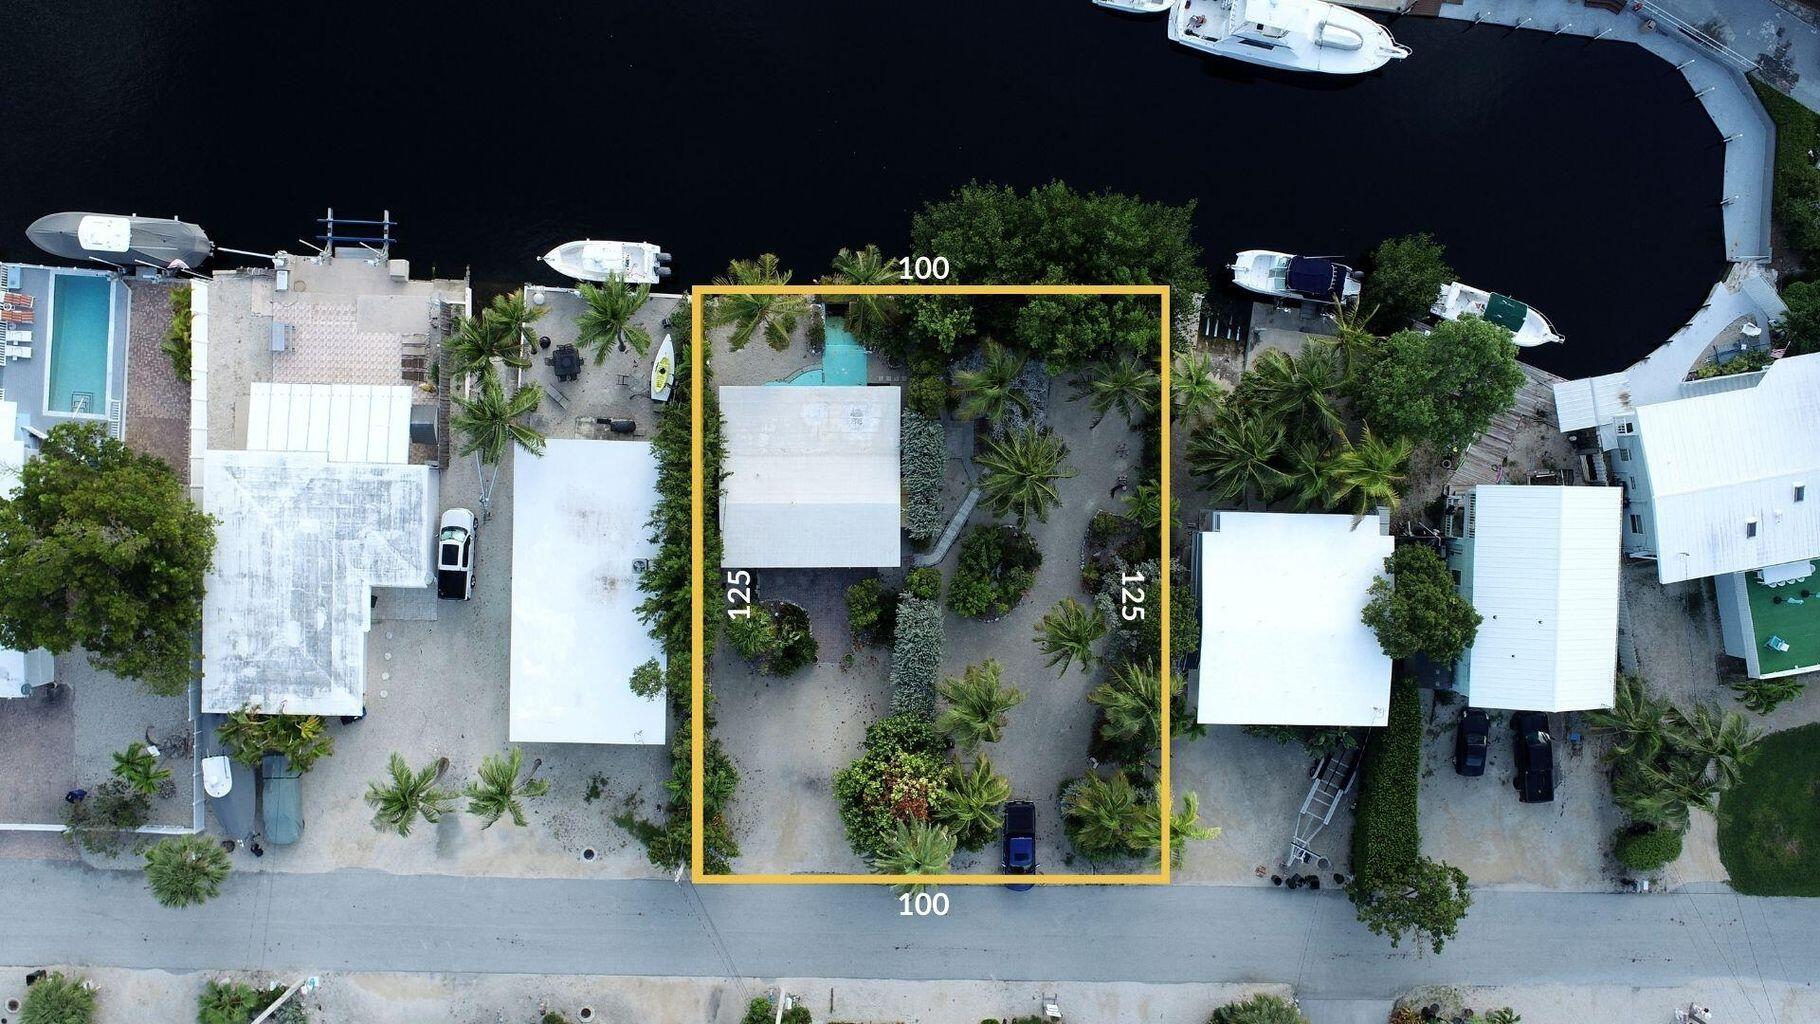 an aerial view of houses with outdoor space